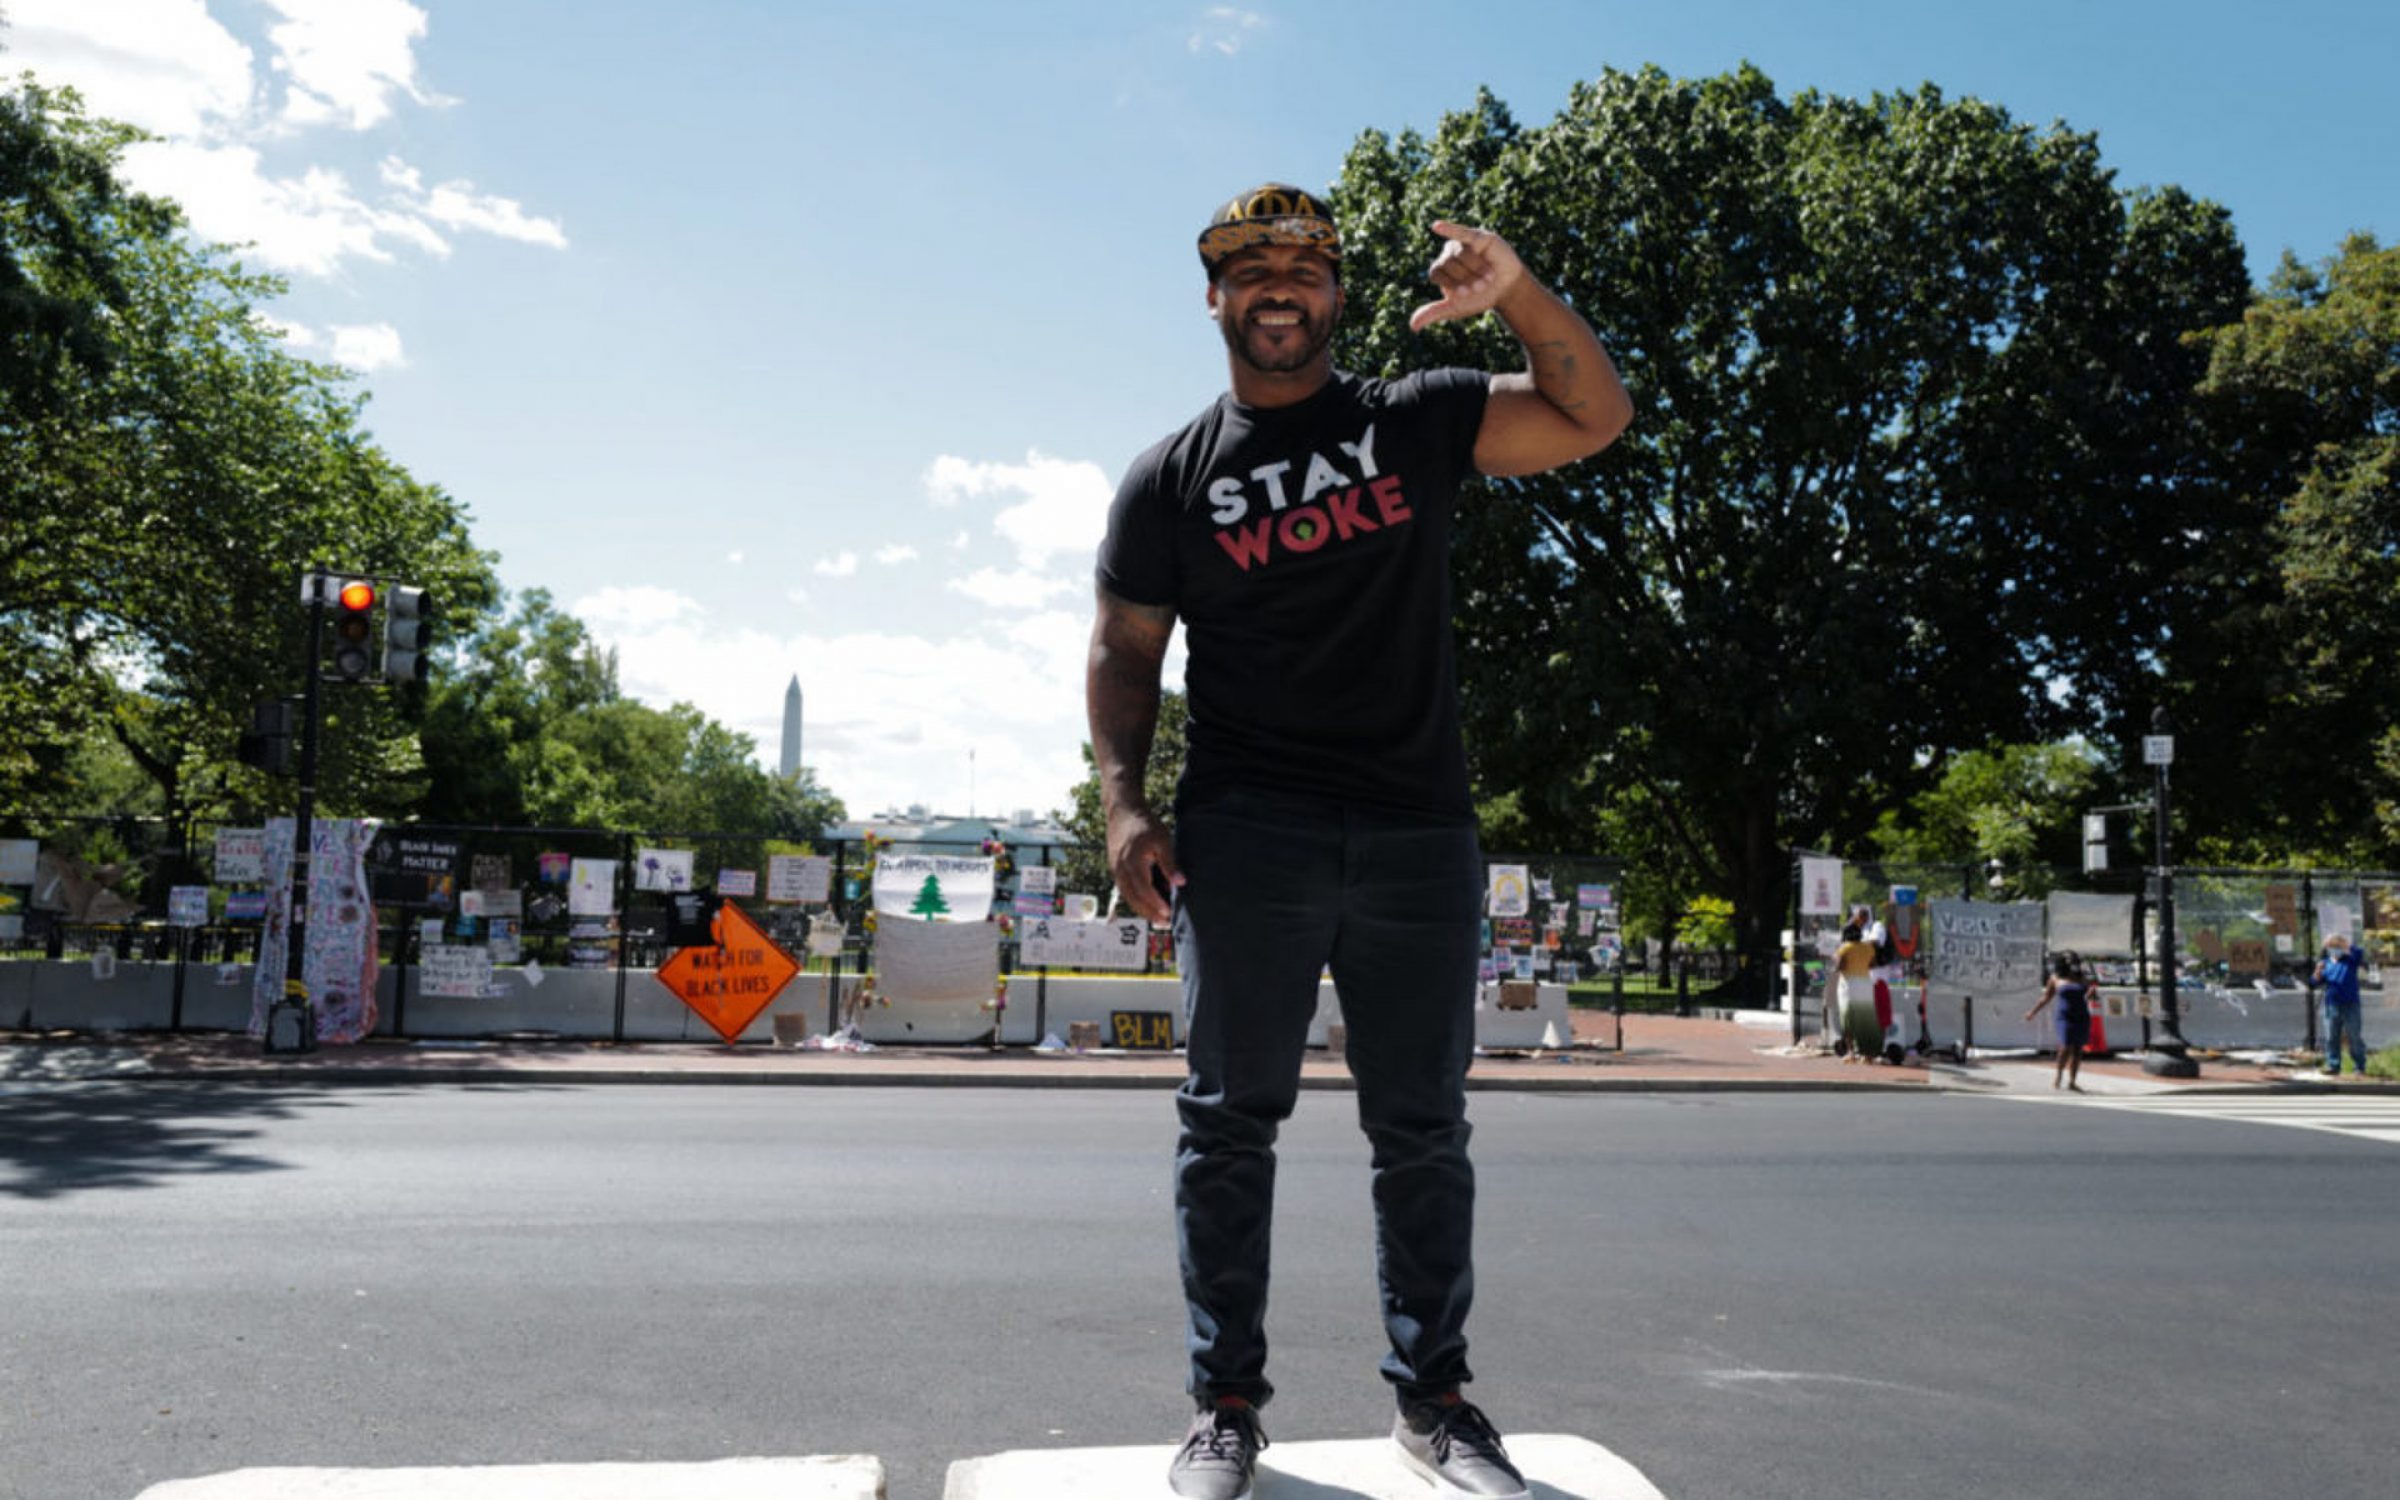 Washington, DC – July 30, 2020: Various protest signs at the ongoing Black Lives Matter Plaza in Washington.